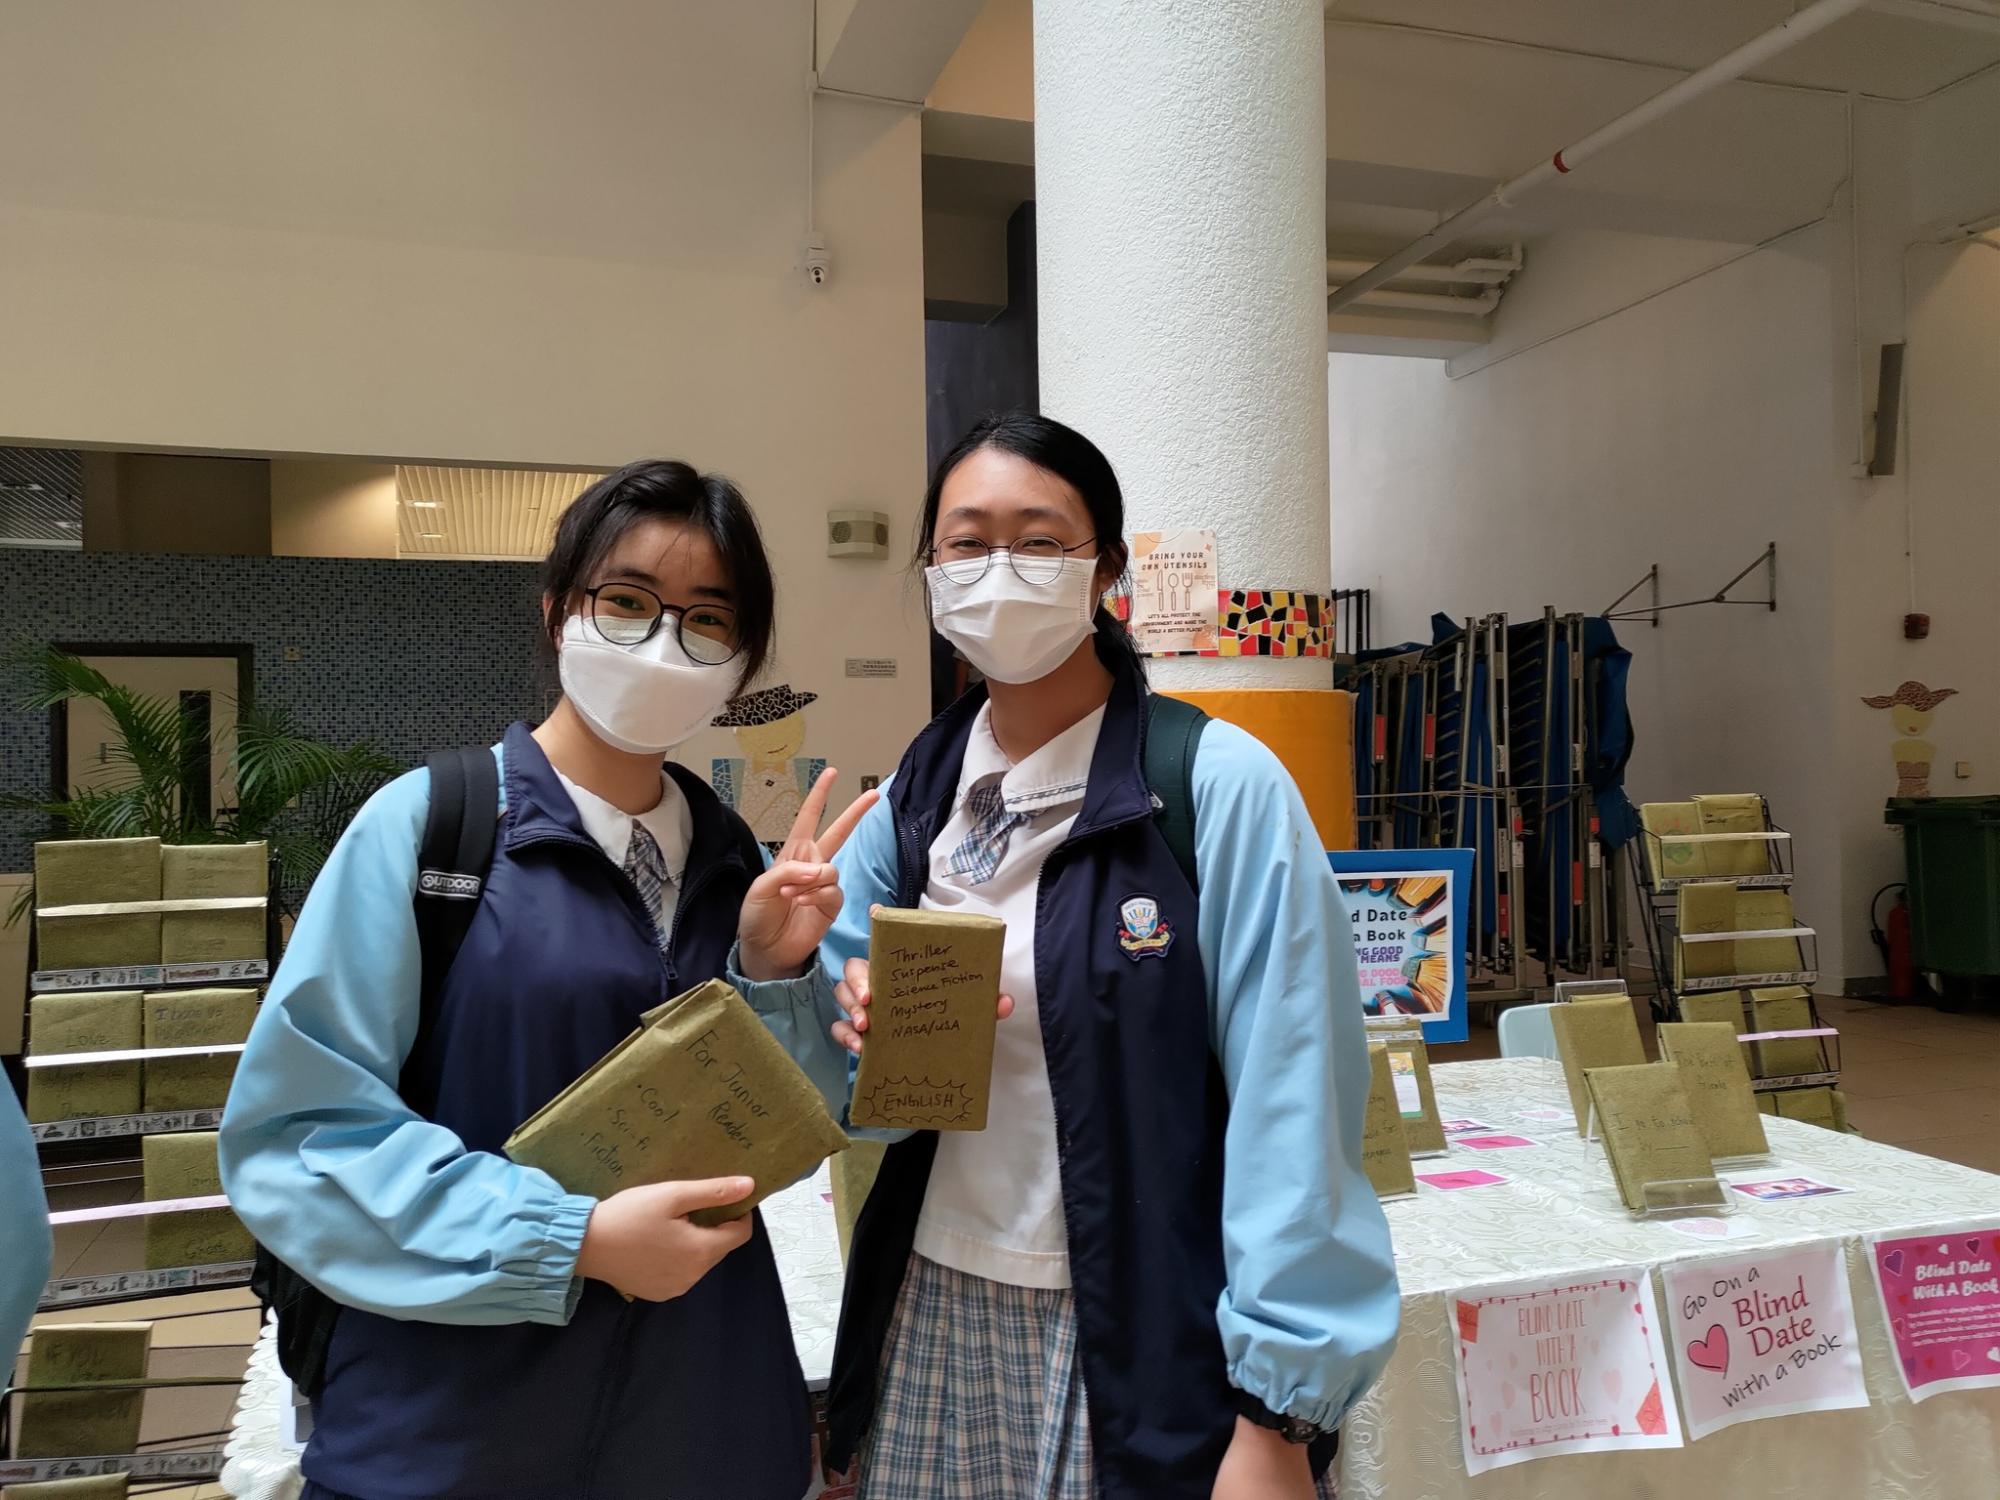 Students participating in an English activity called Blind Date with a Book to celebrate the Thanksgiving Day